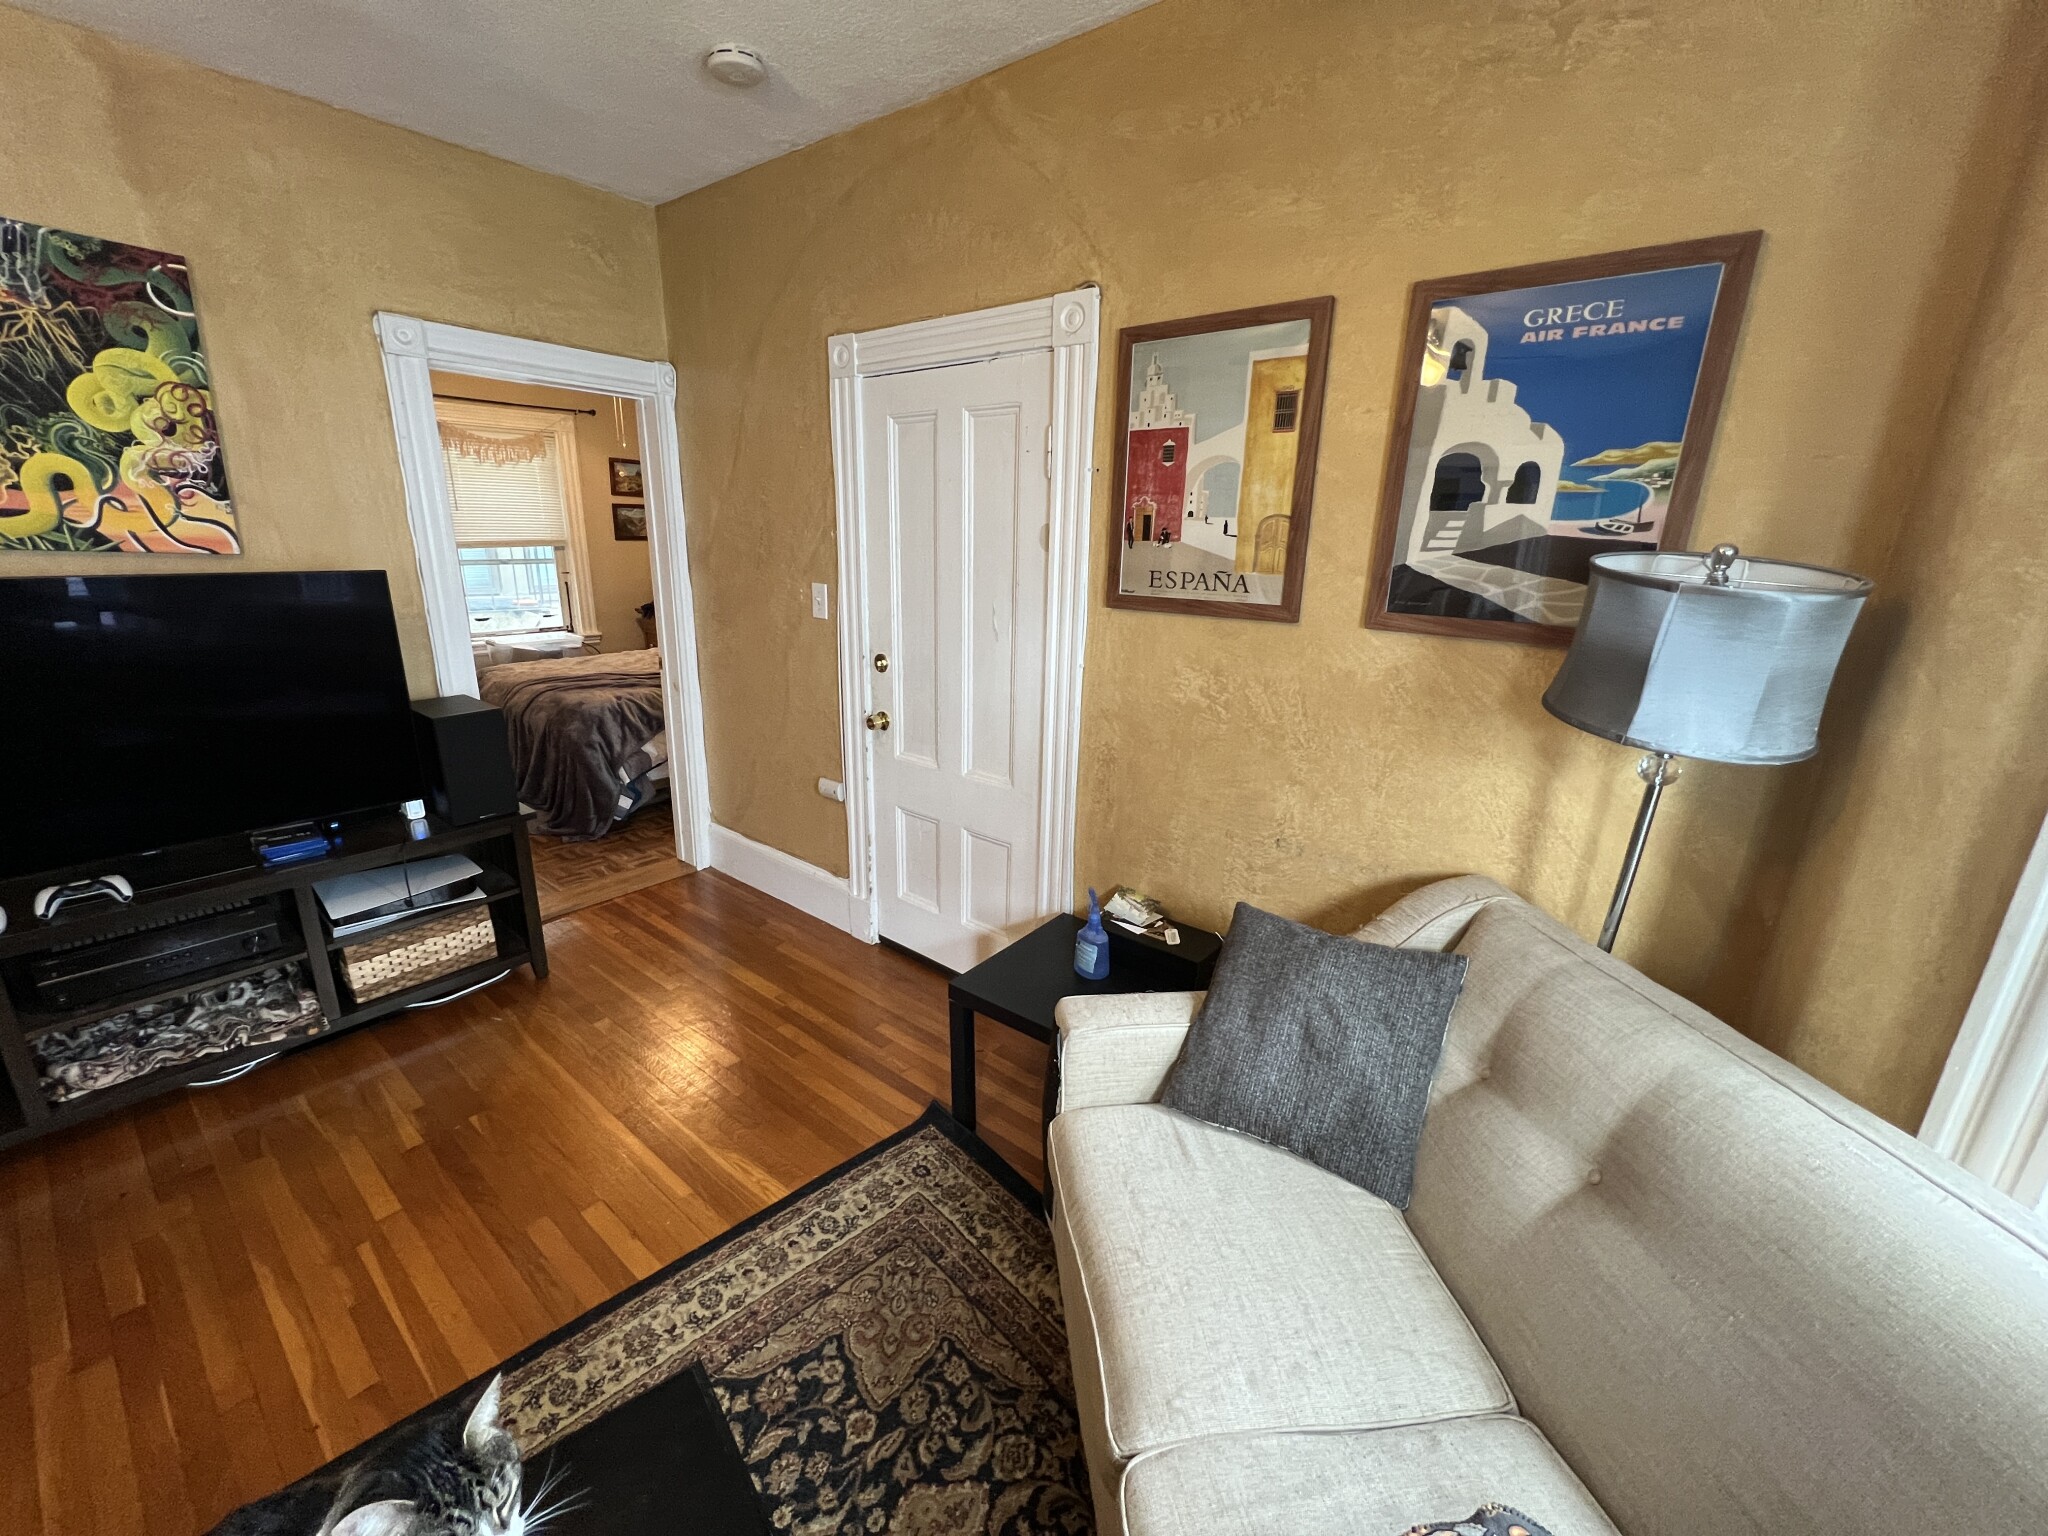 Photos of apartment on Craigie Ter.,Somerville MA 02143